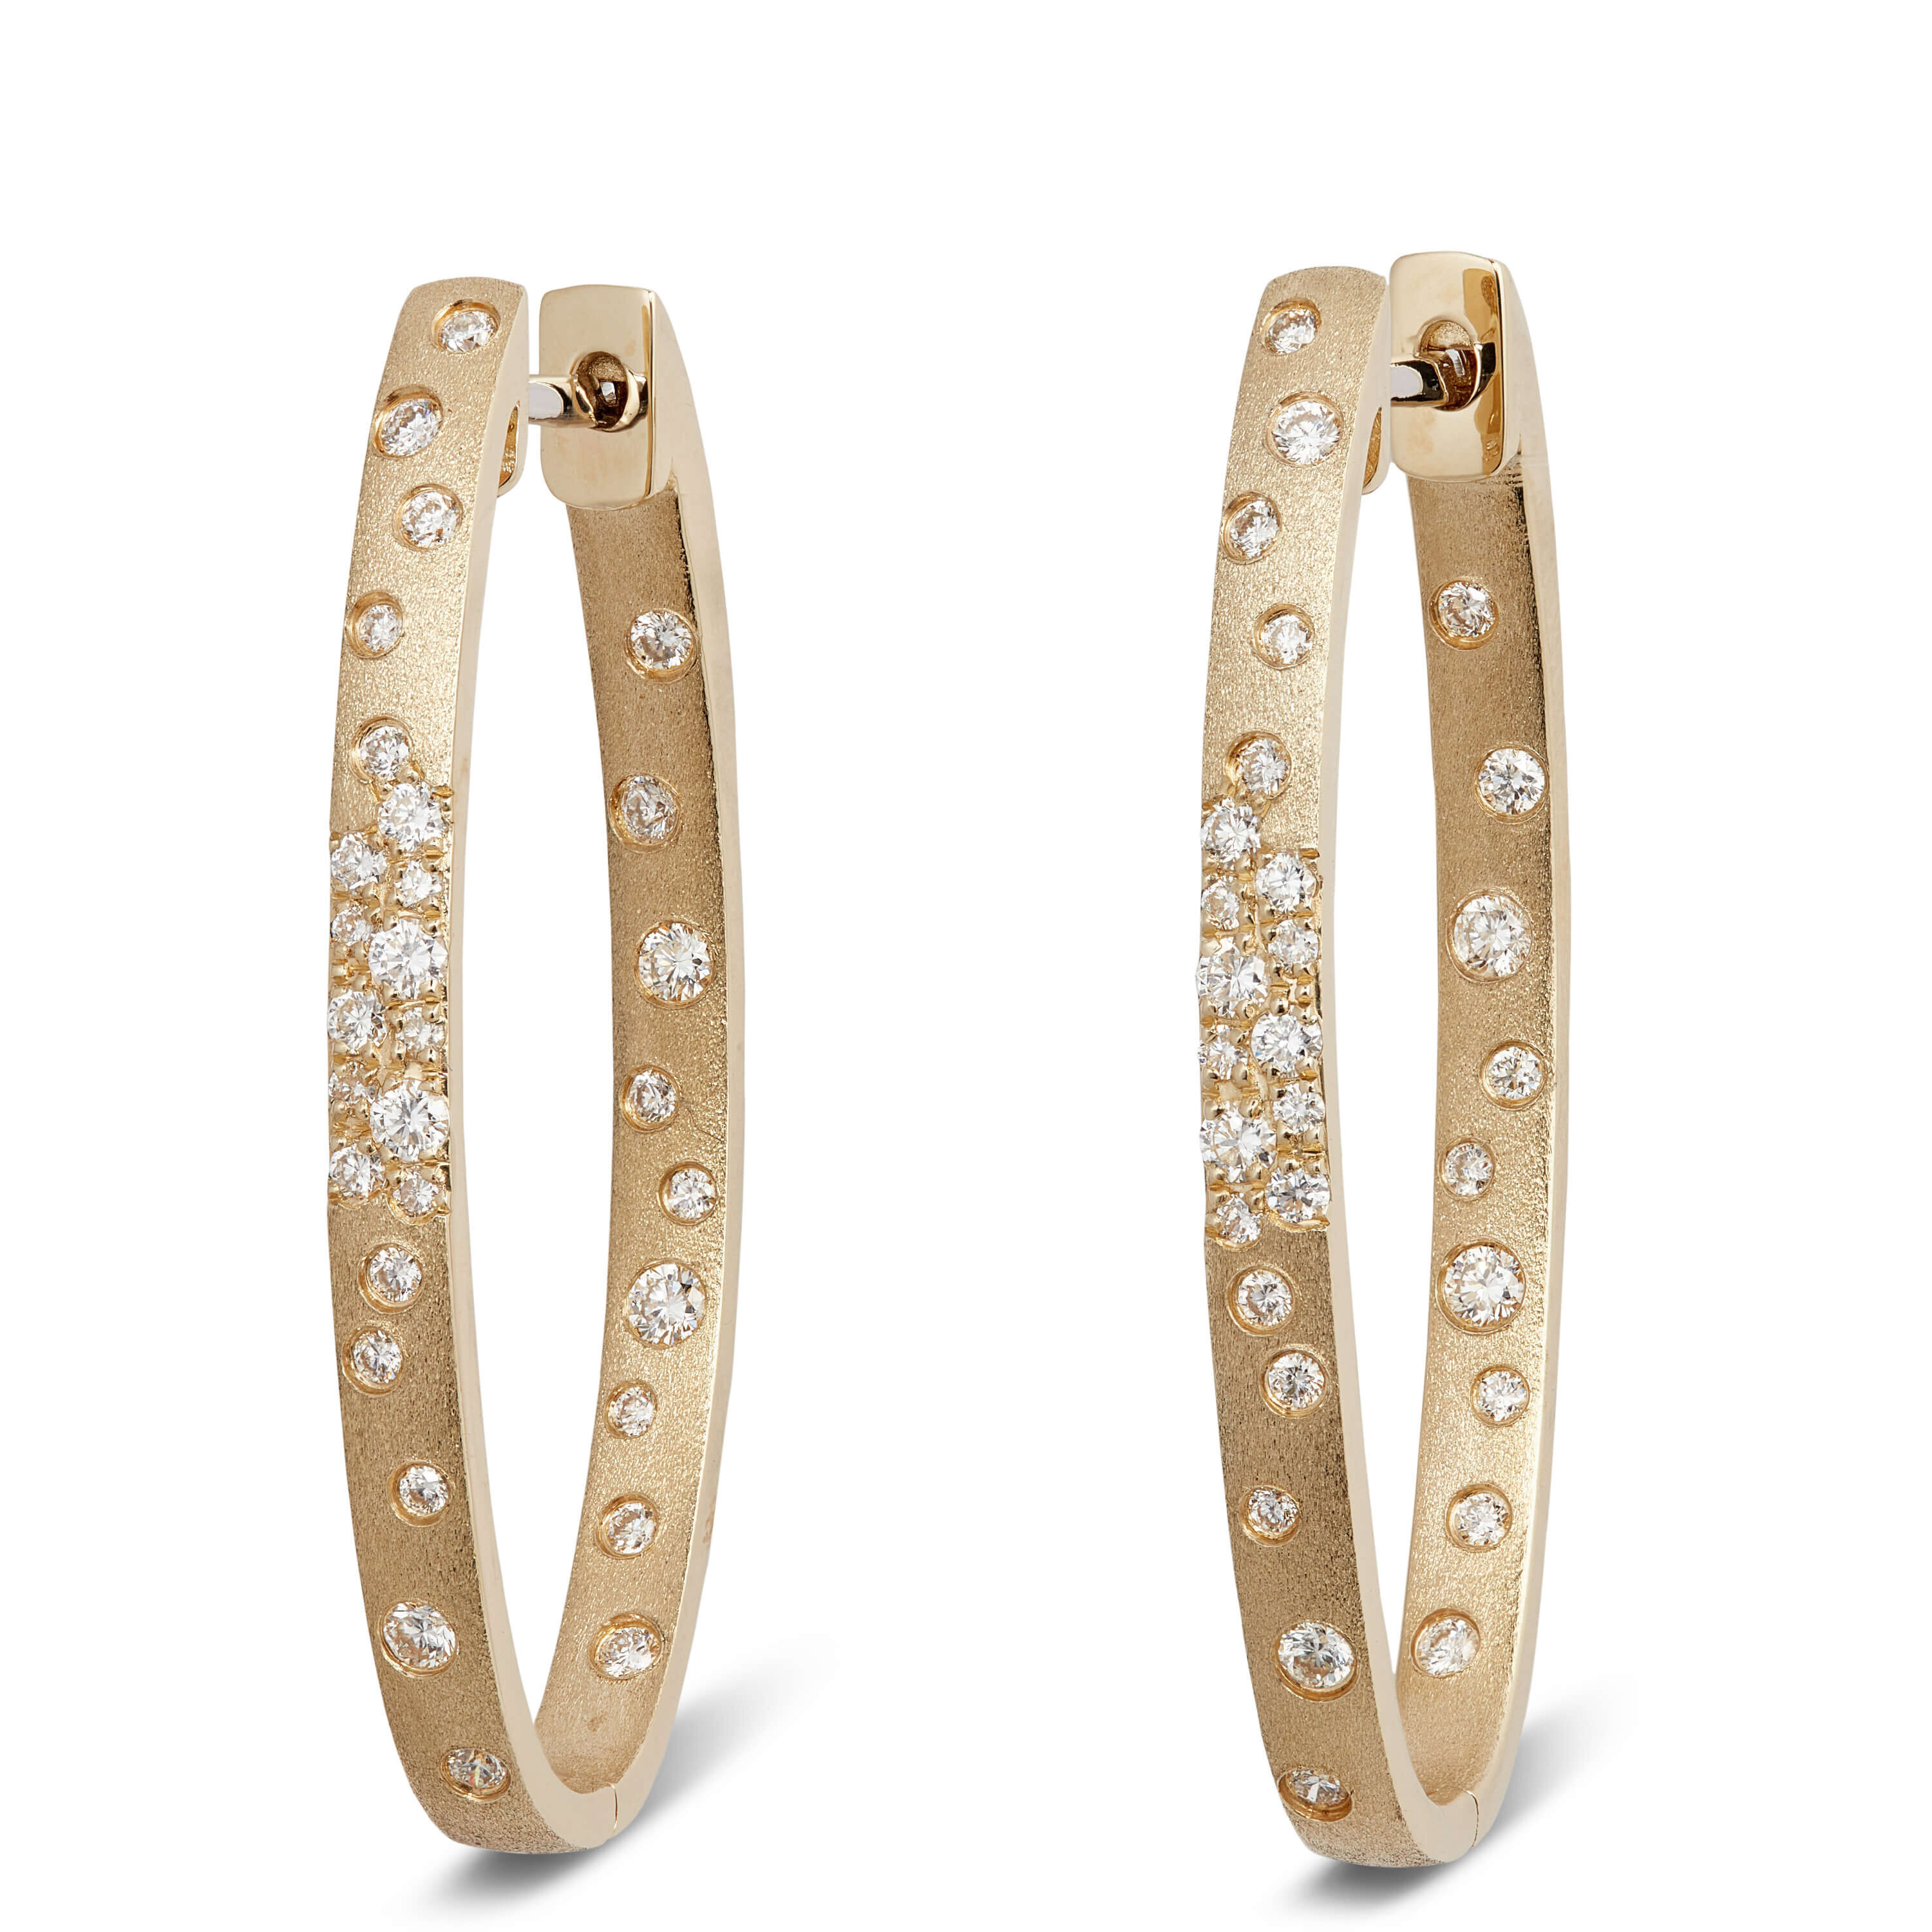 Oval Hoop Confetti Diamond and Gold Earrings, 14K Yellow Gold